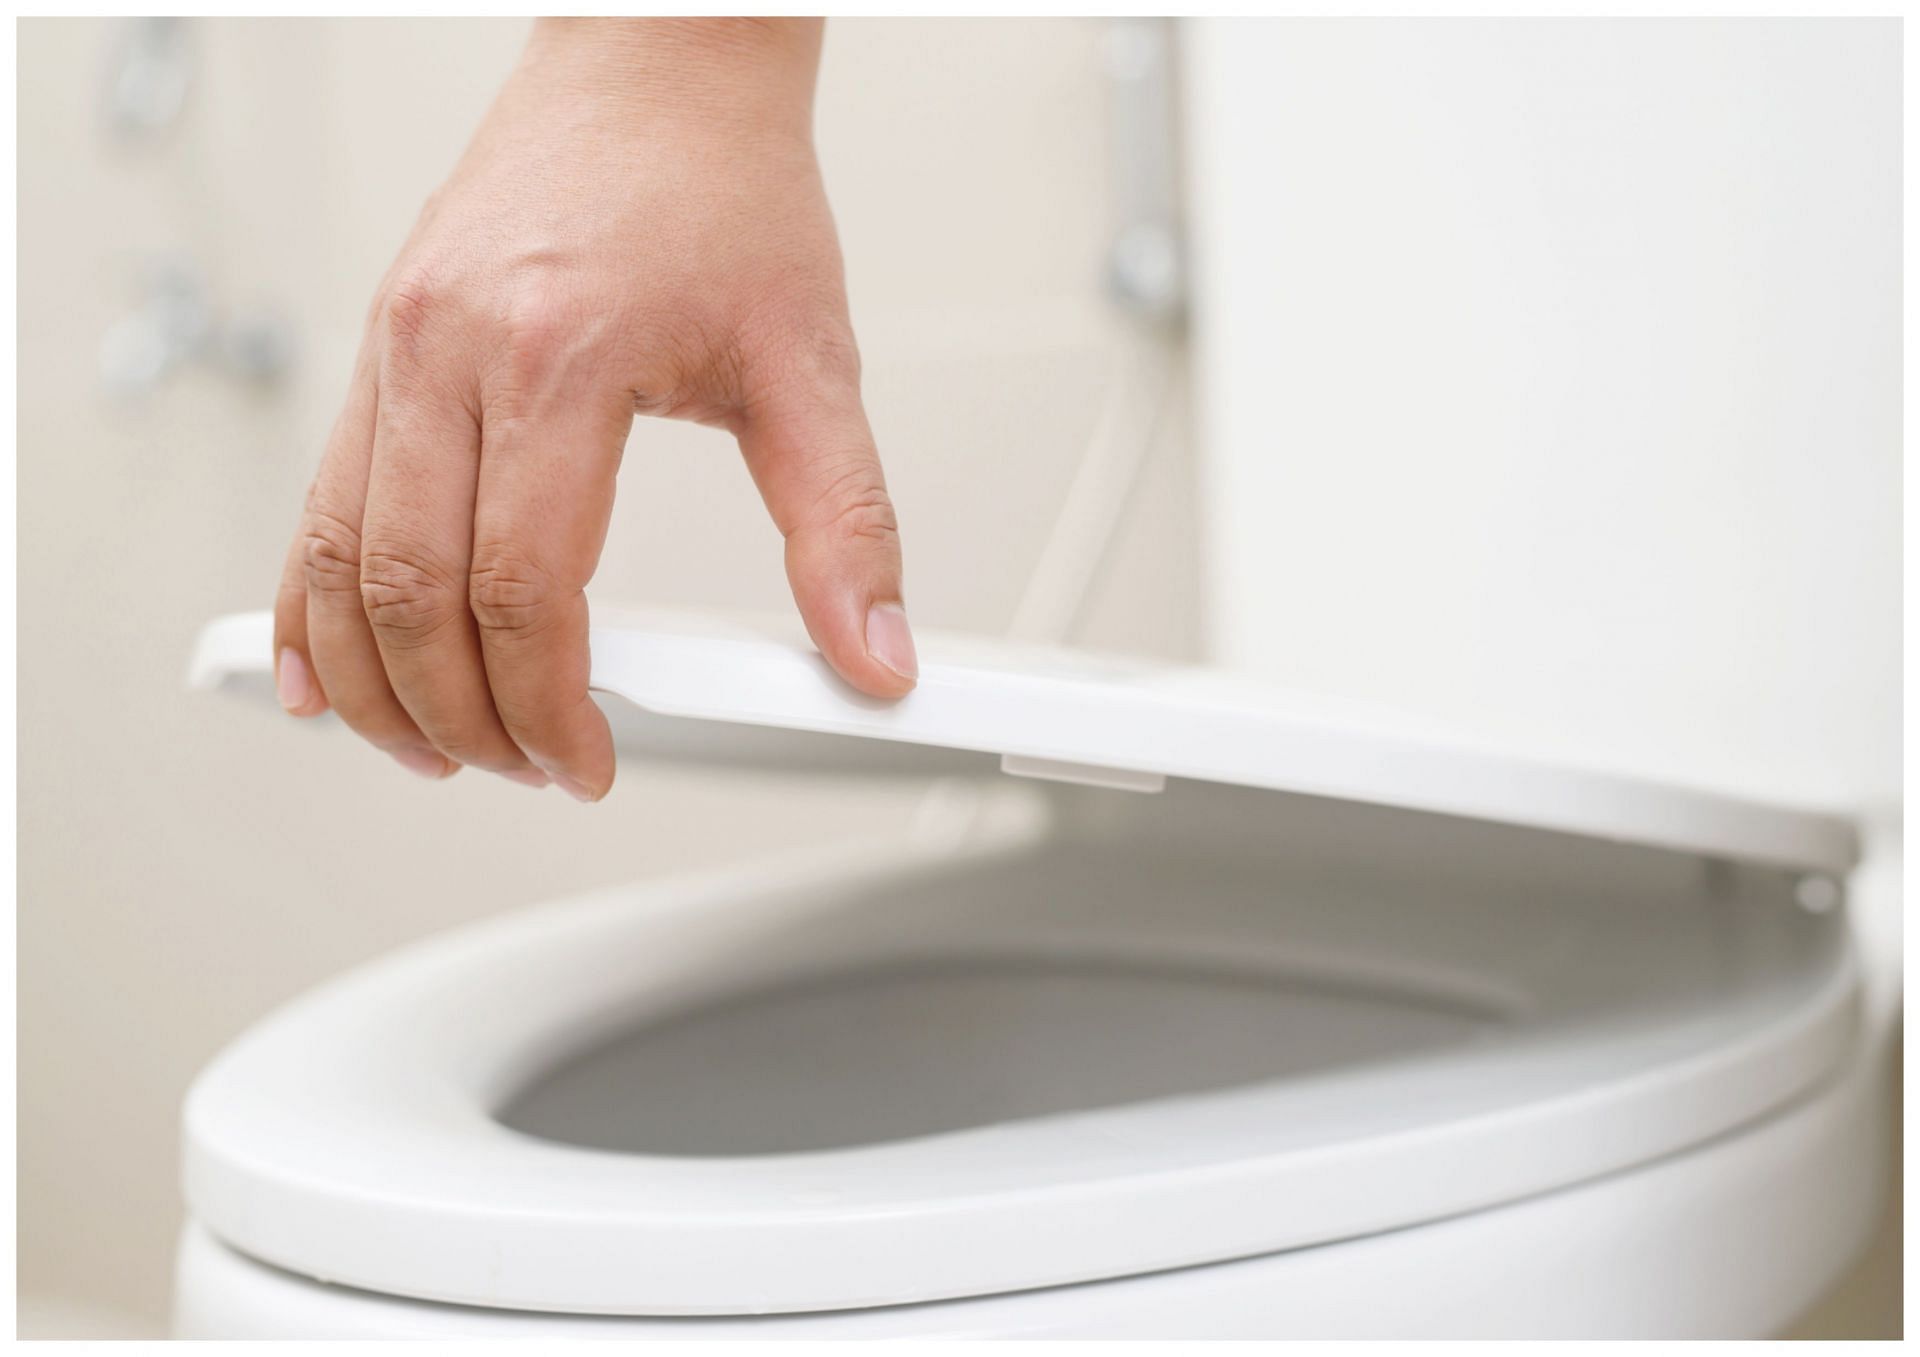 Flushing the toilet with lid down? Viruses may still reach nearby surfaces - Sportskeeda